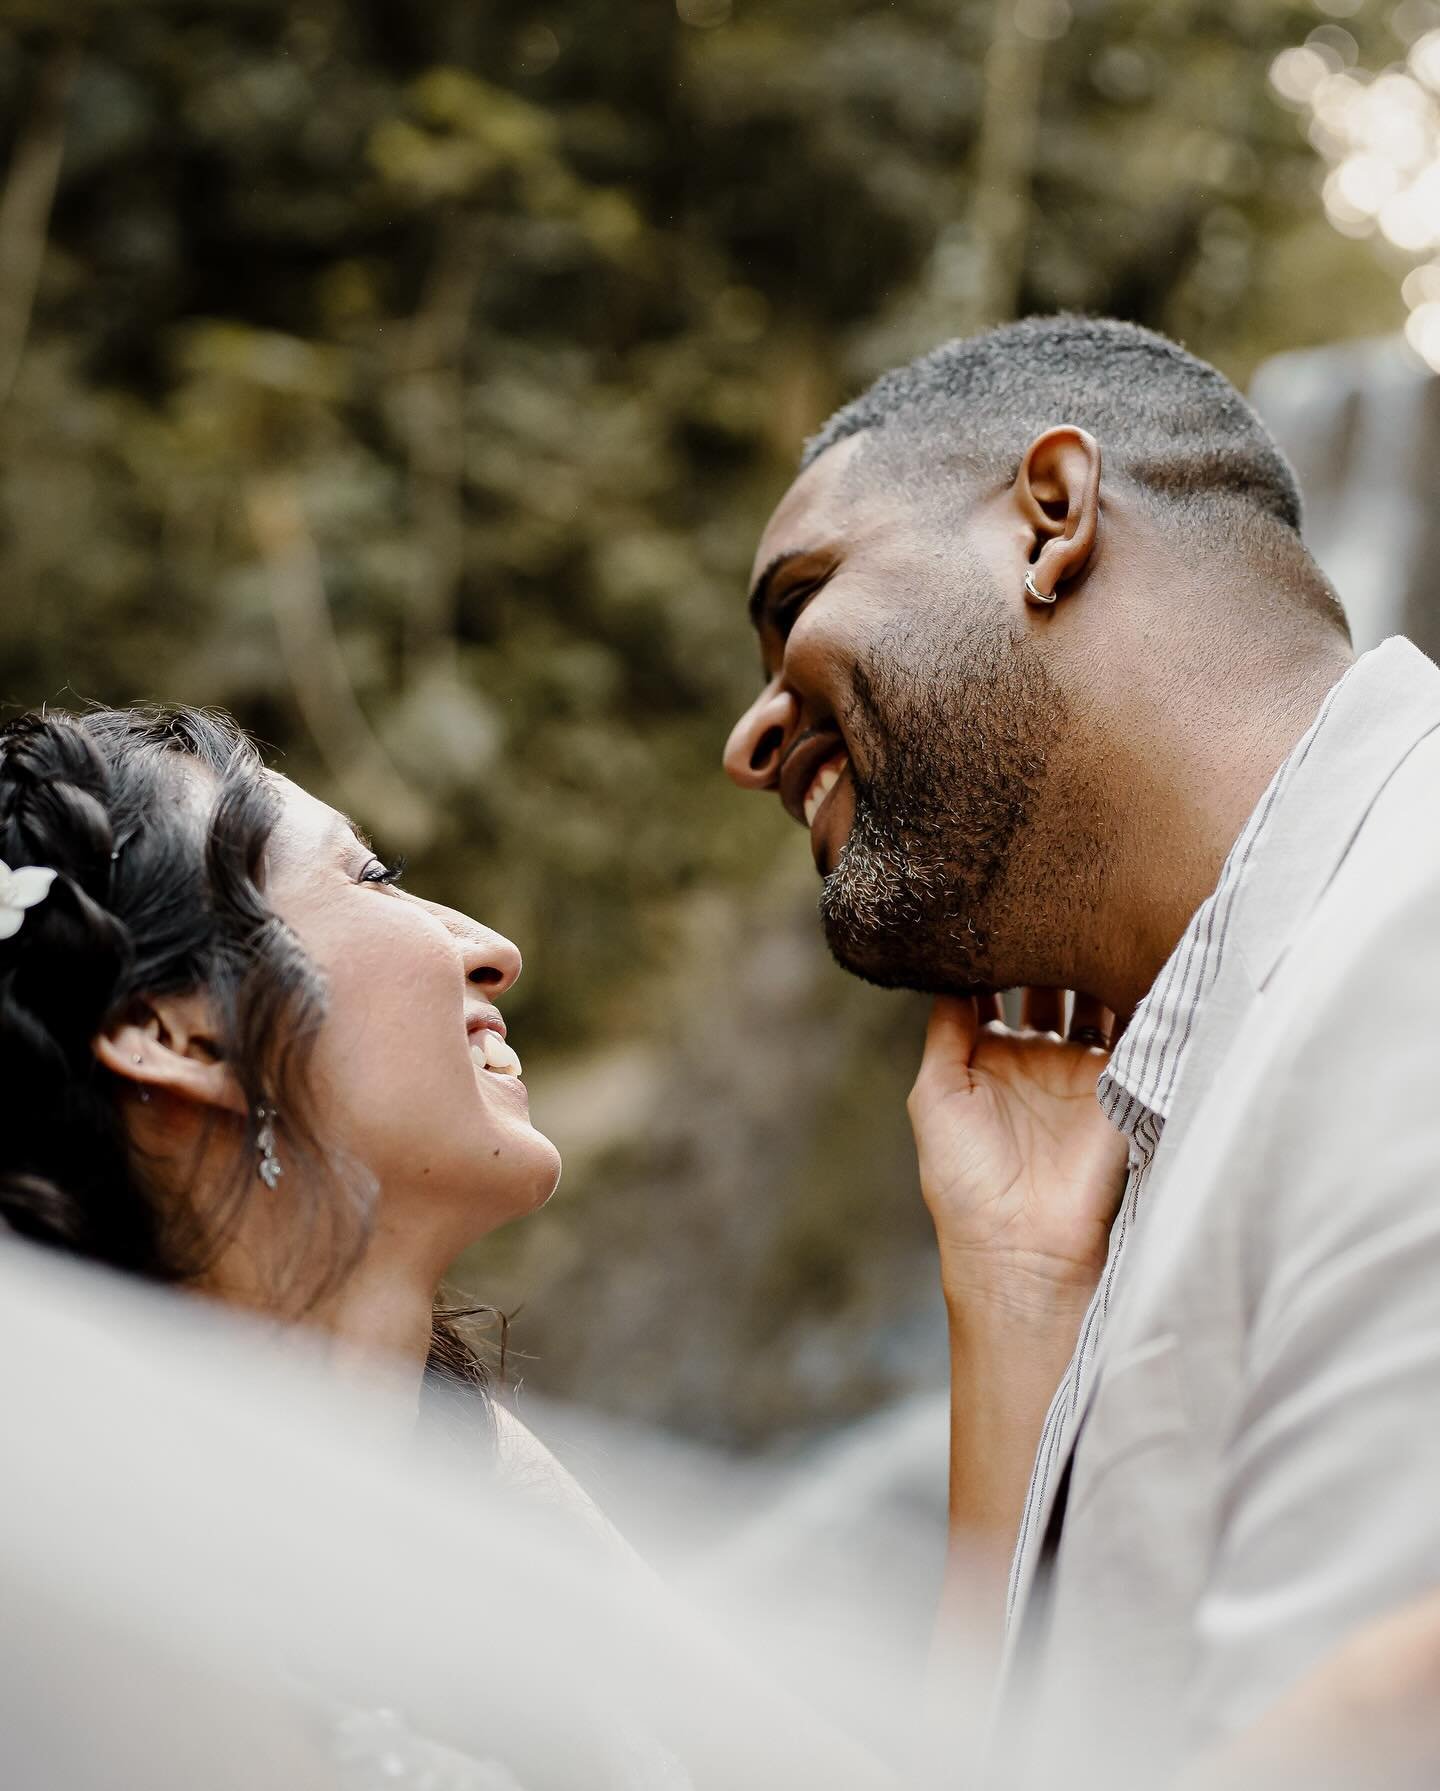 The sun peeked over the lush green mountains, creating a soft golden glow over the peaceful waters of the Gozalandia waterfalls. It was a beautiful morning, perfect for an intimate elopement between two souls deeply in love. A + W stood hand in hand,